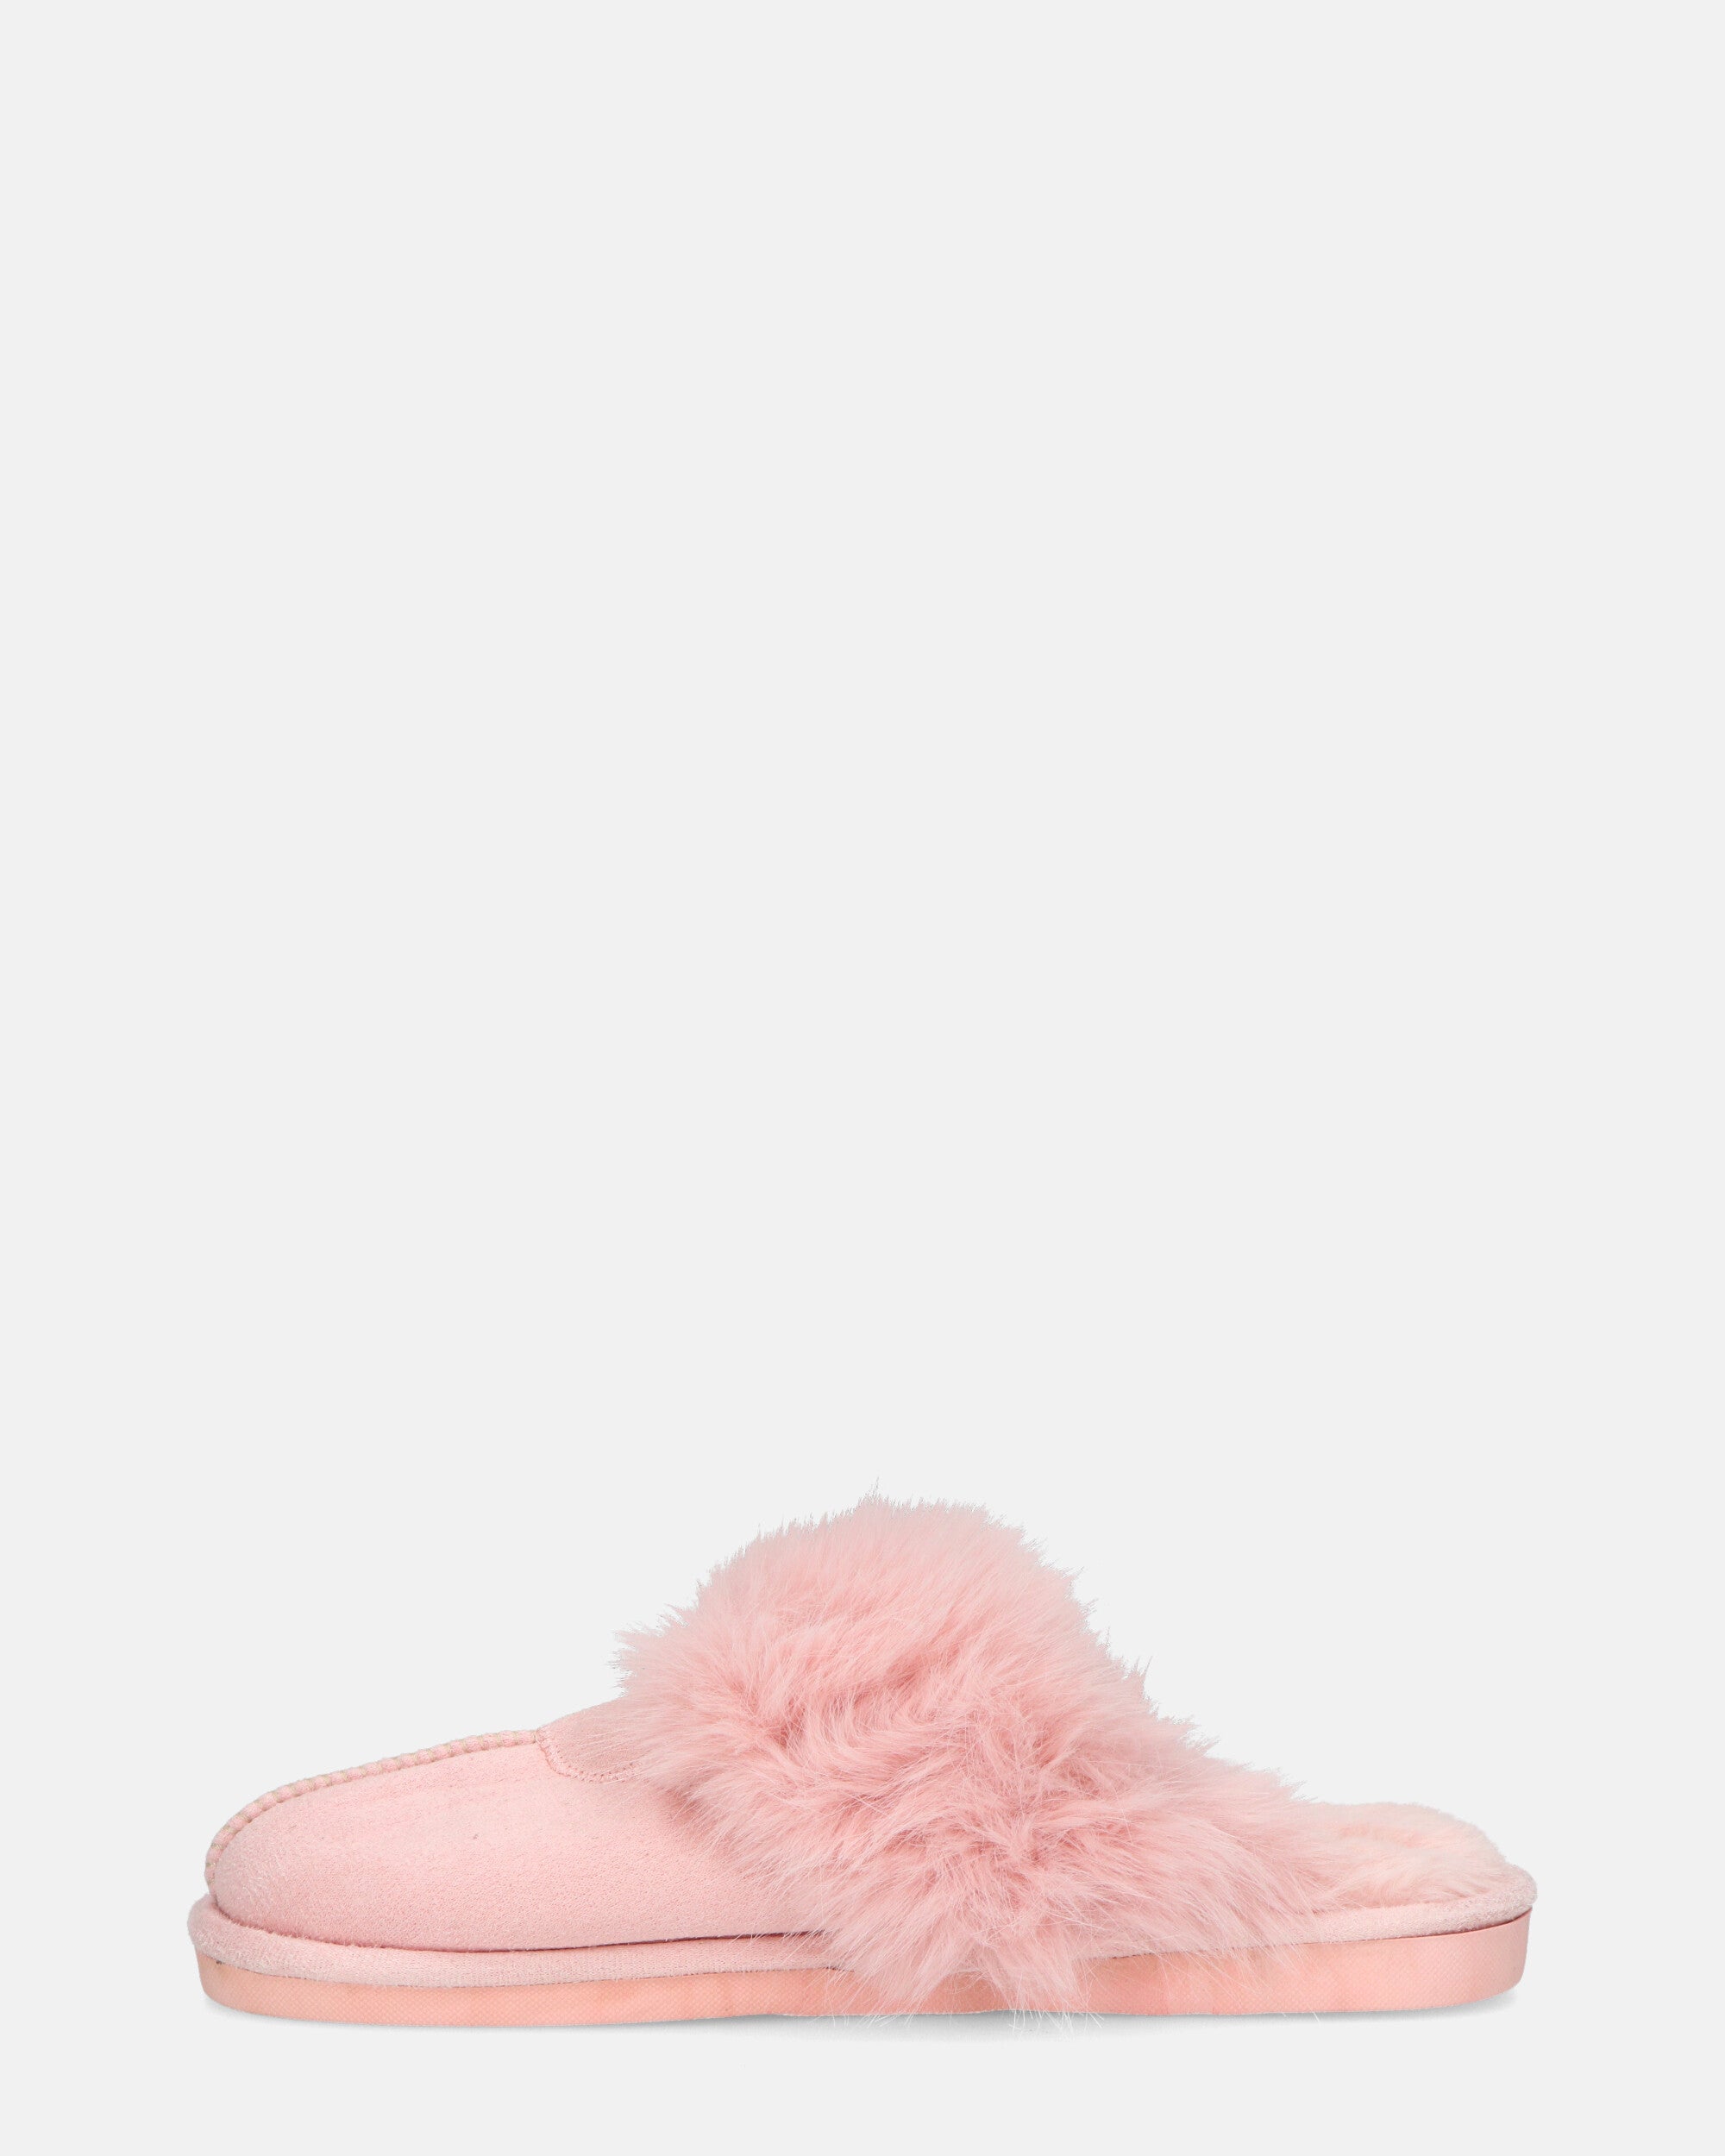 MIDORI - pink slippers with fur and suede